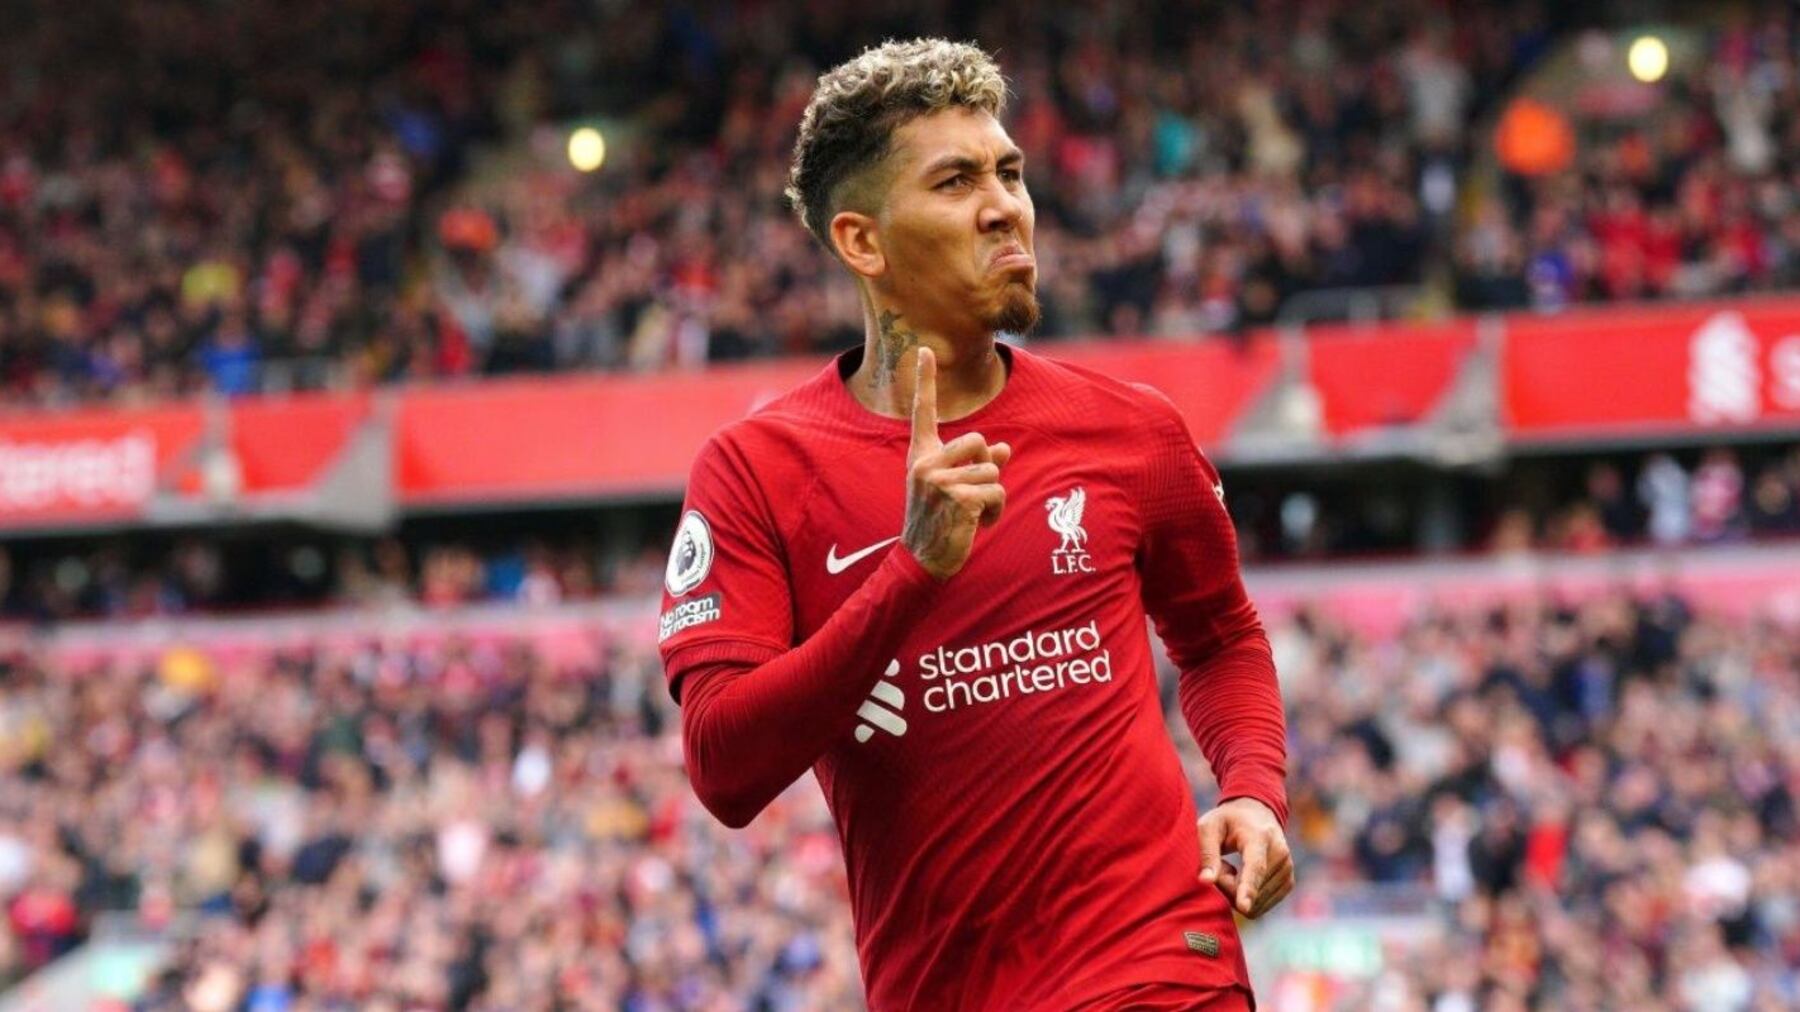 Firmino shines and Klopp smiles, Nunez could go to the bench after this match